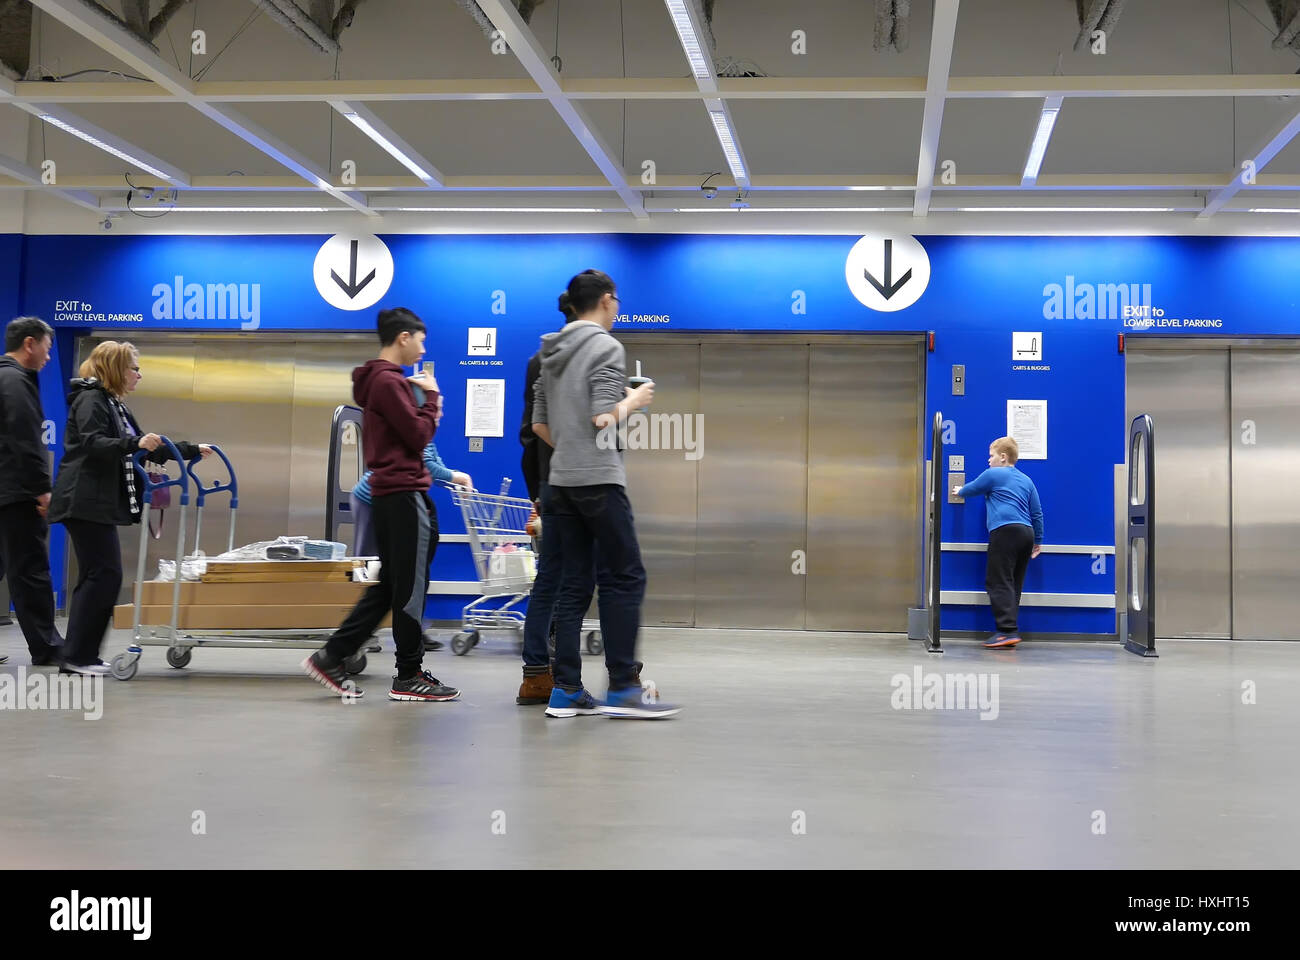 Coquitlam, BC, Canada - March 25, 2017 : Motion of people taking elevator inside Ikea store Stock Photo